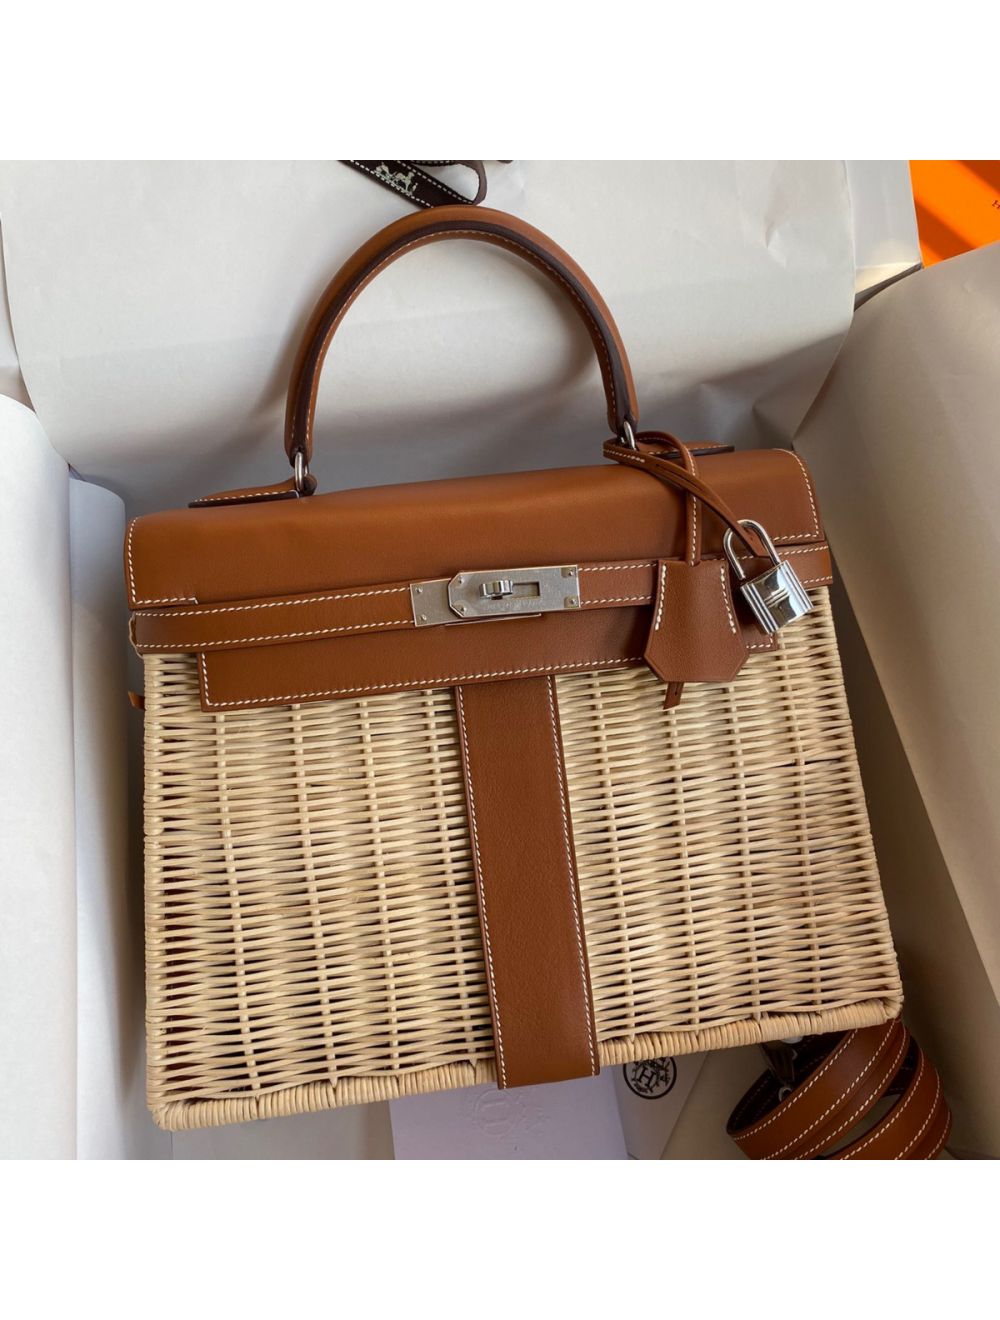 Replica Hermes Picnic Kelly 28cm Bag in Wicker with Barenia Leather